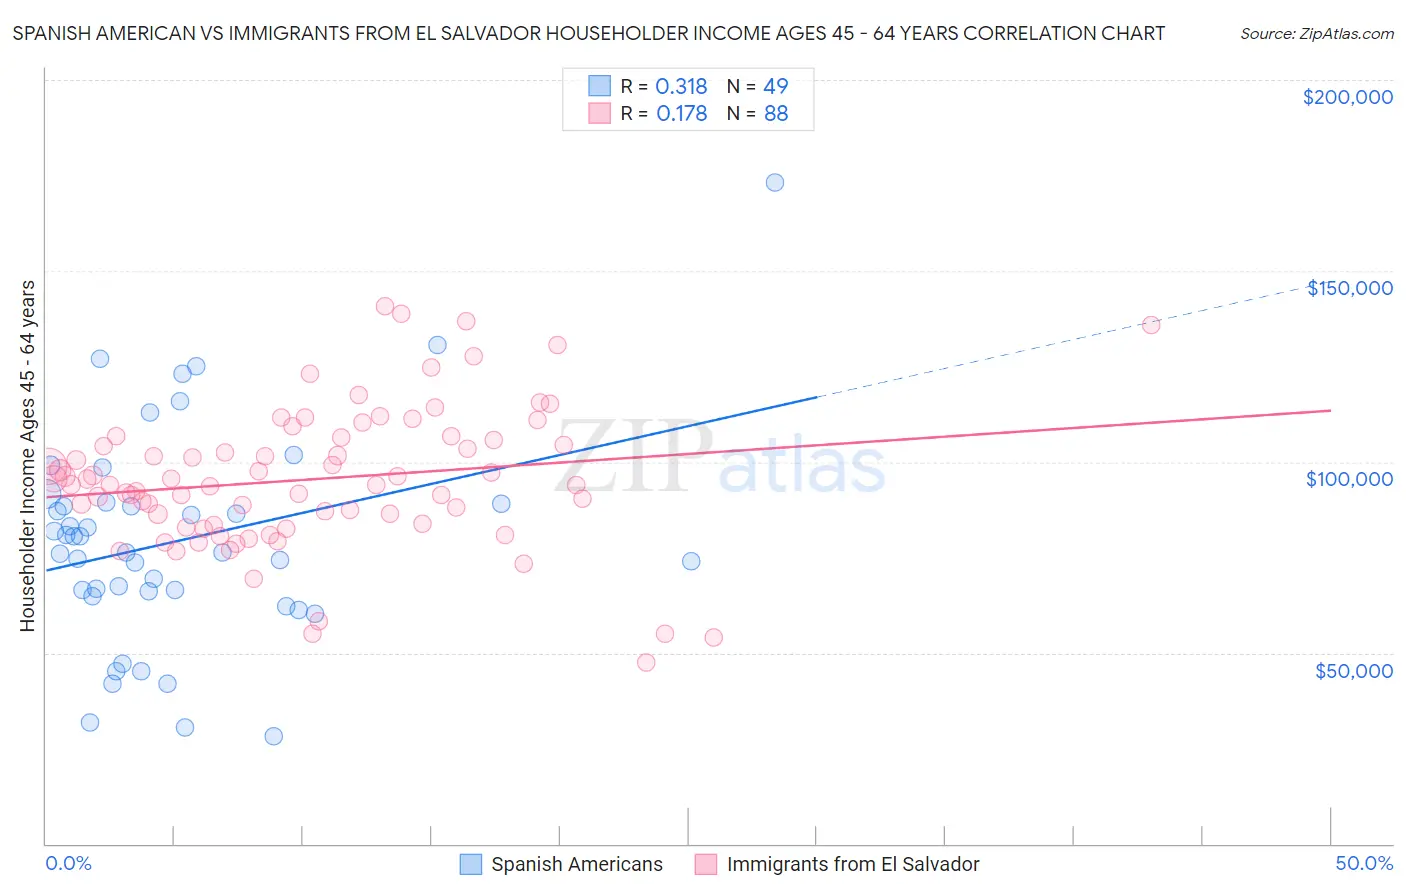 Spanish American vs Immigrants from El Salvador Householder Income Ages 45 - 64 years